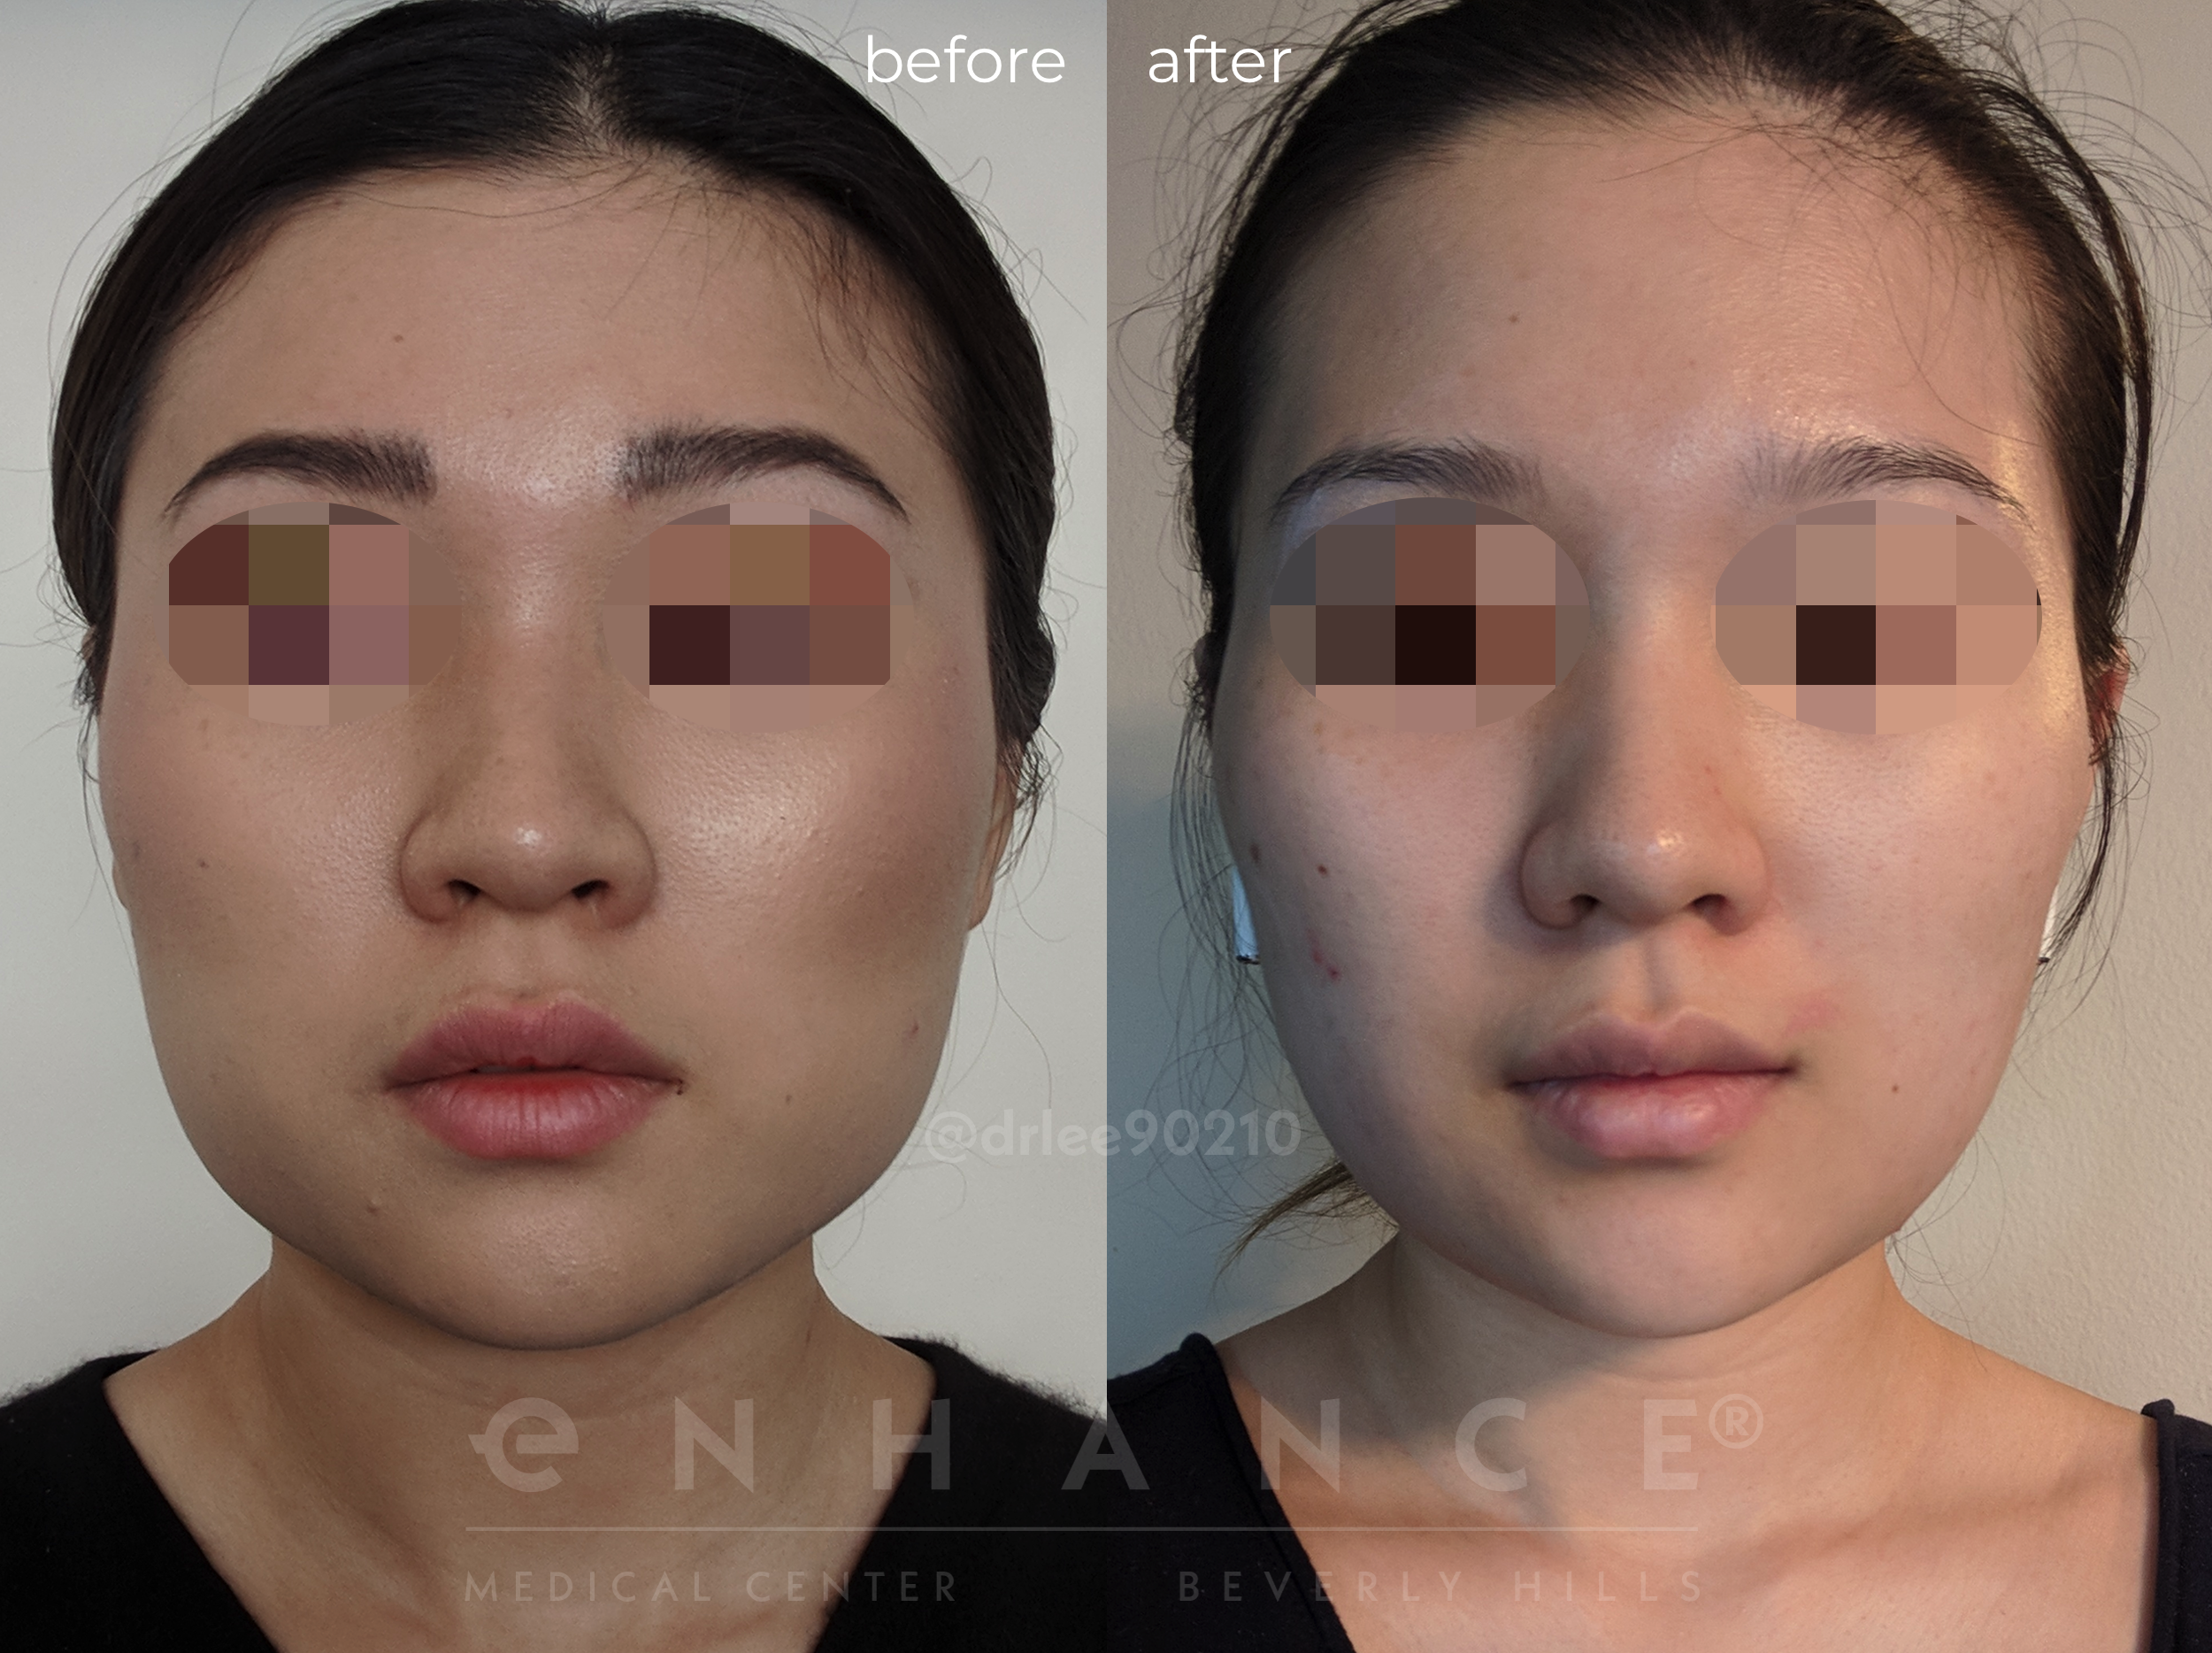 Jaw reduction photos